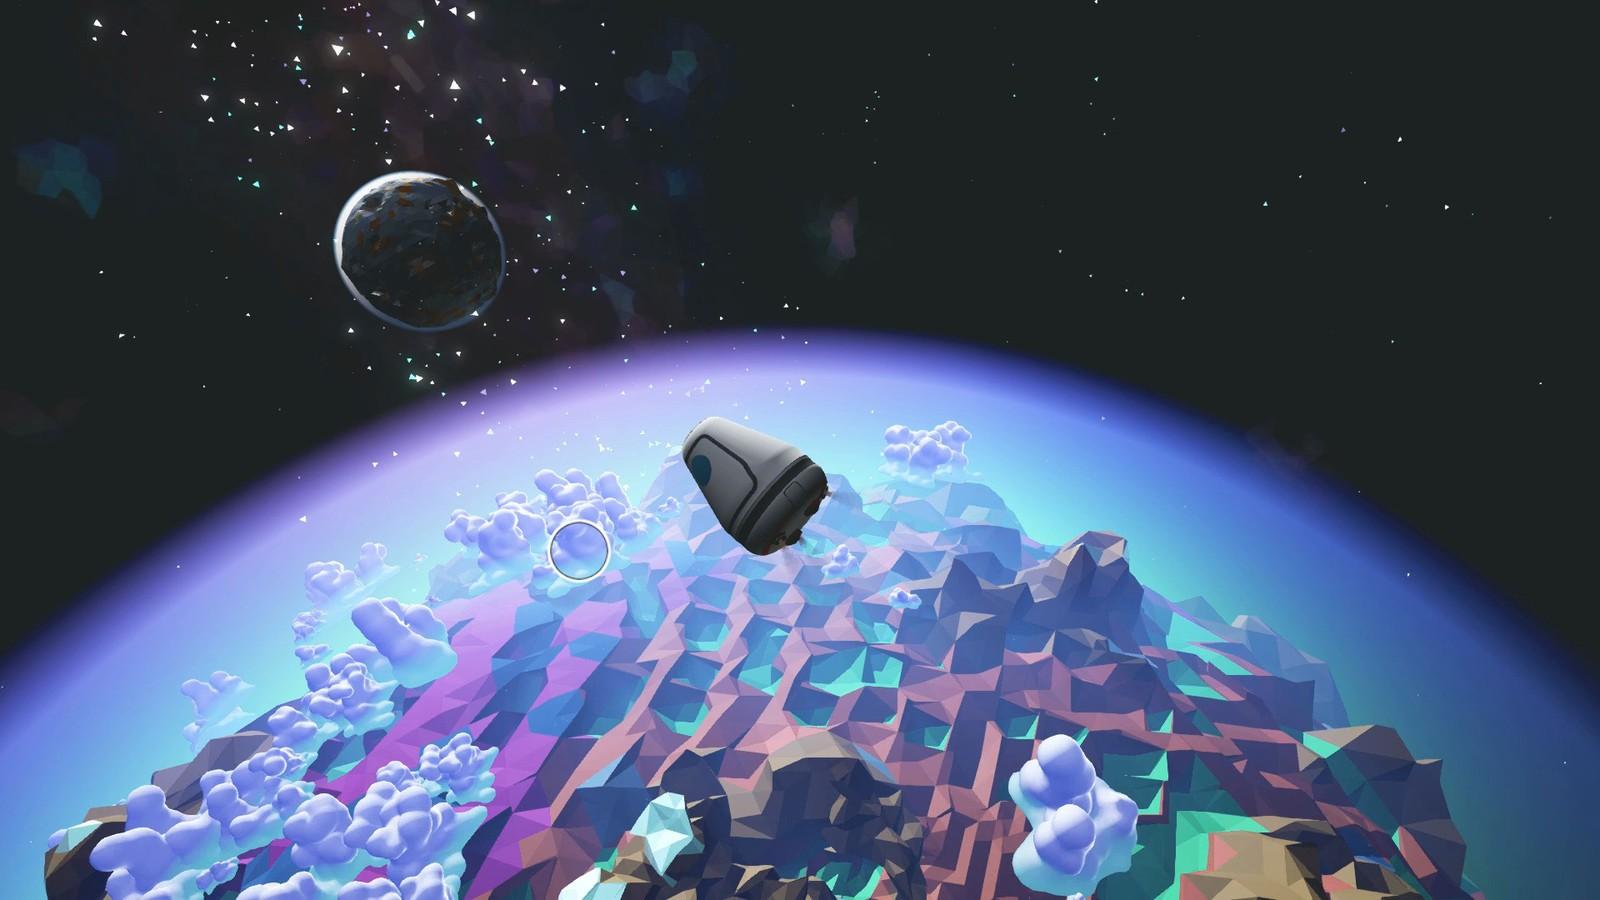 ASTRONEER HD Wallpaper and Background Image